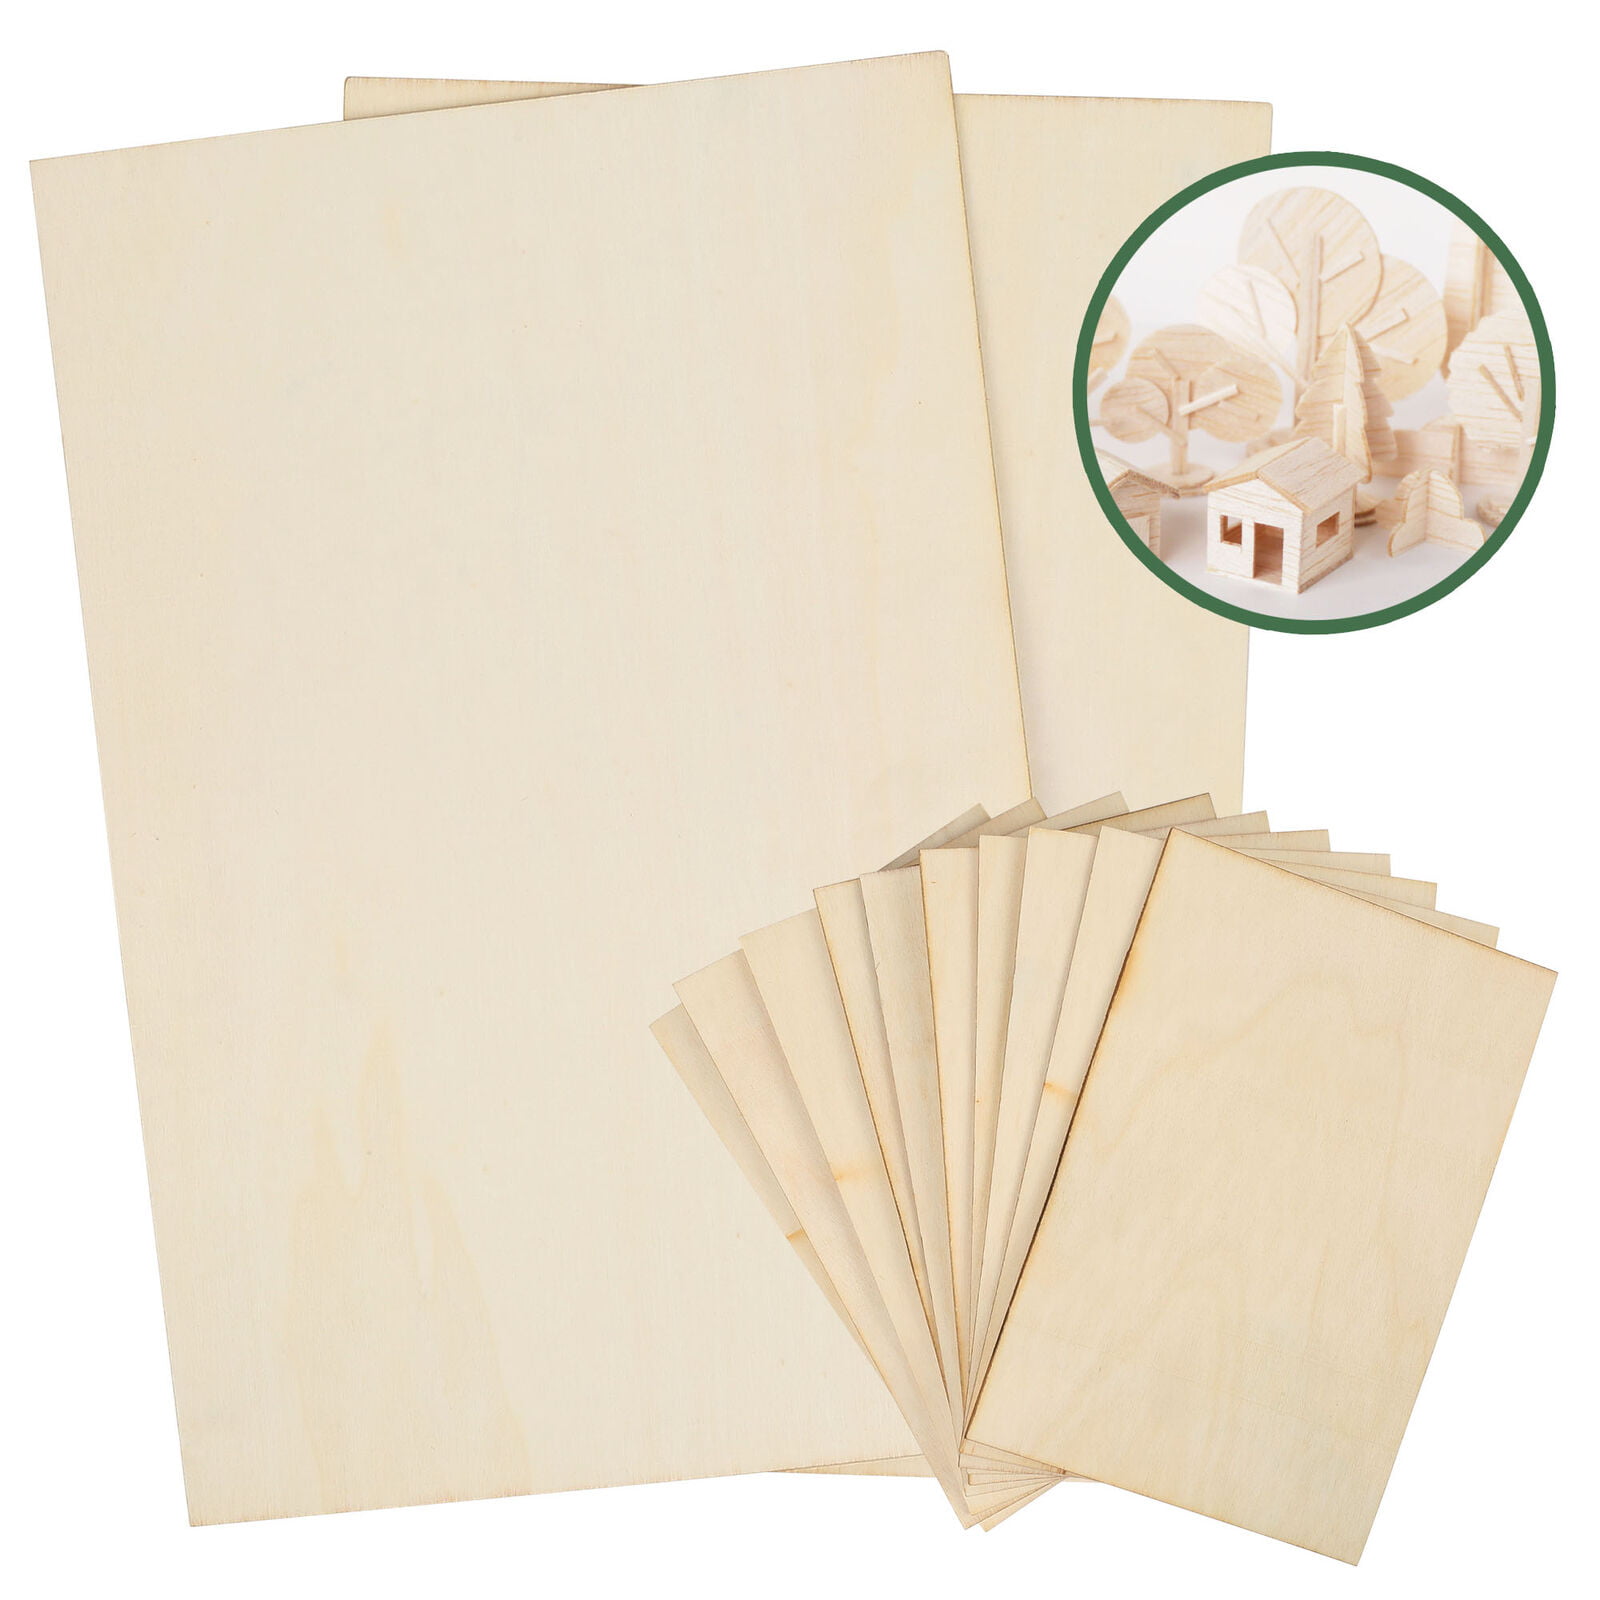 15 Pack 6x4 Basswood Sheets For Crafts 2mm Thin Cricut Wood Sheets Cricut  Basswood Plywood Sheets For Christmas Decorations Drawing Painting Diy  Birth